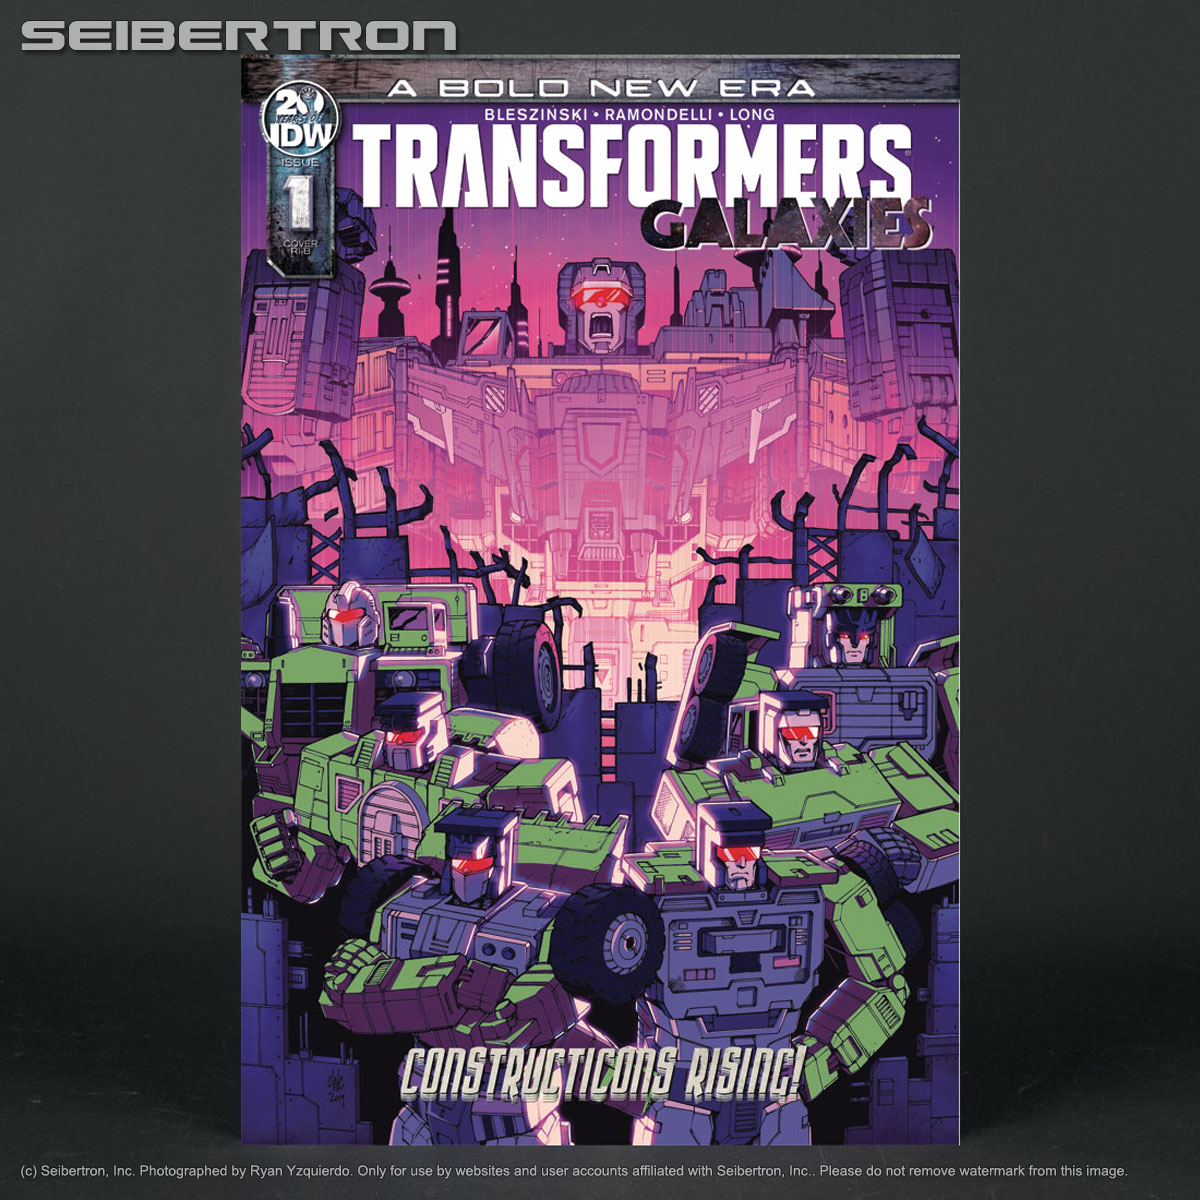 Transformers News: Transformers Galaxies #1 is Out Today, Here's Everything You Need To Know